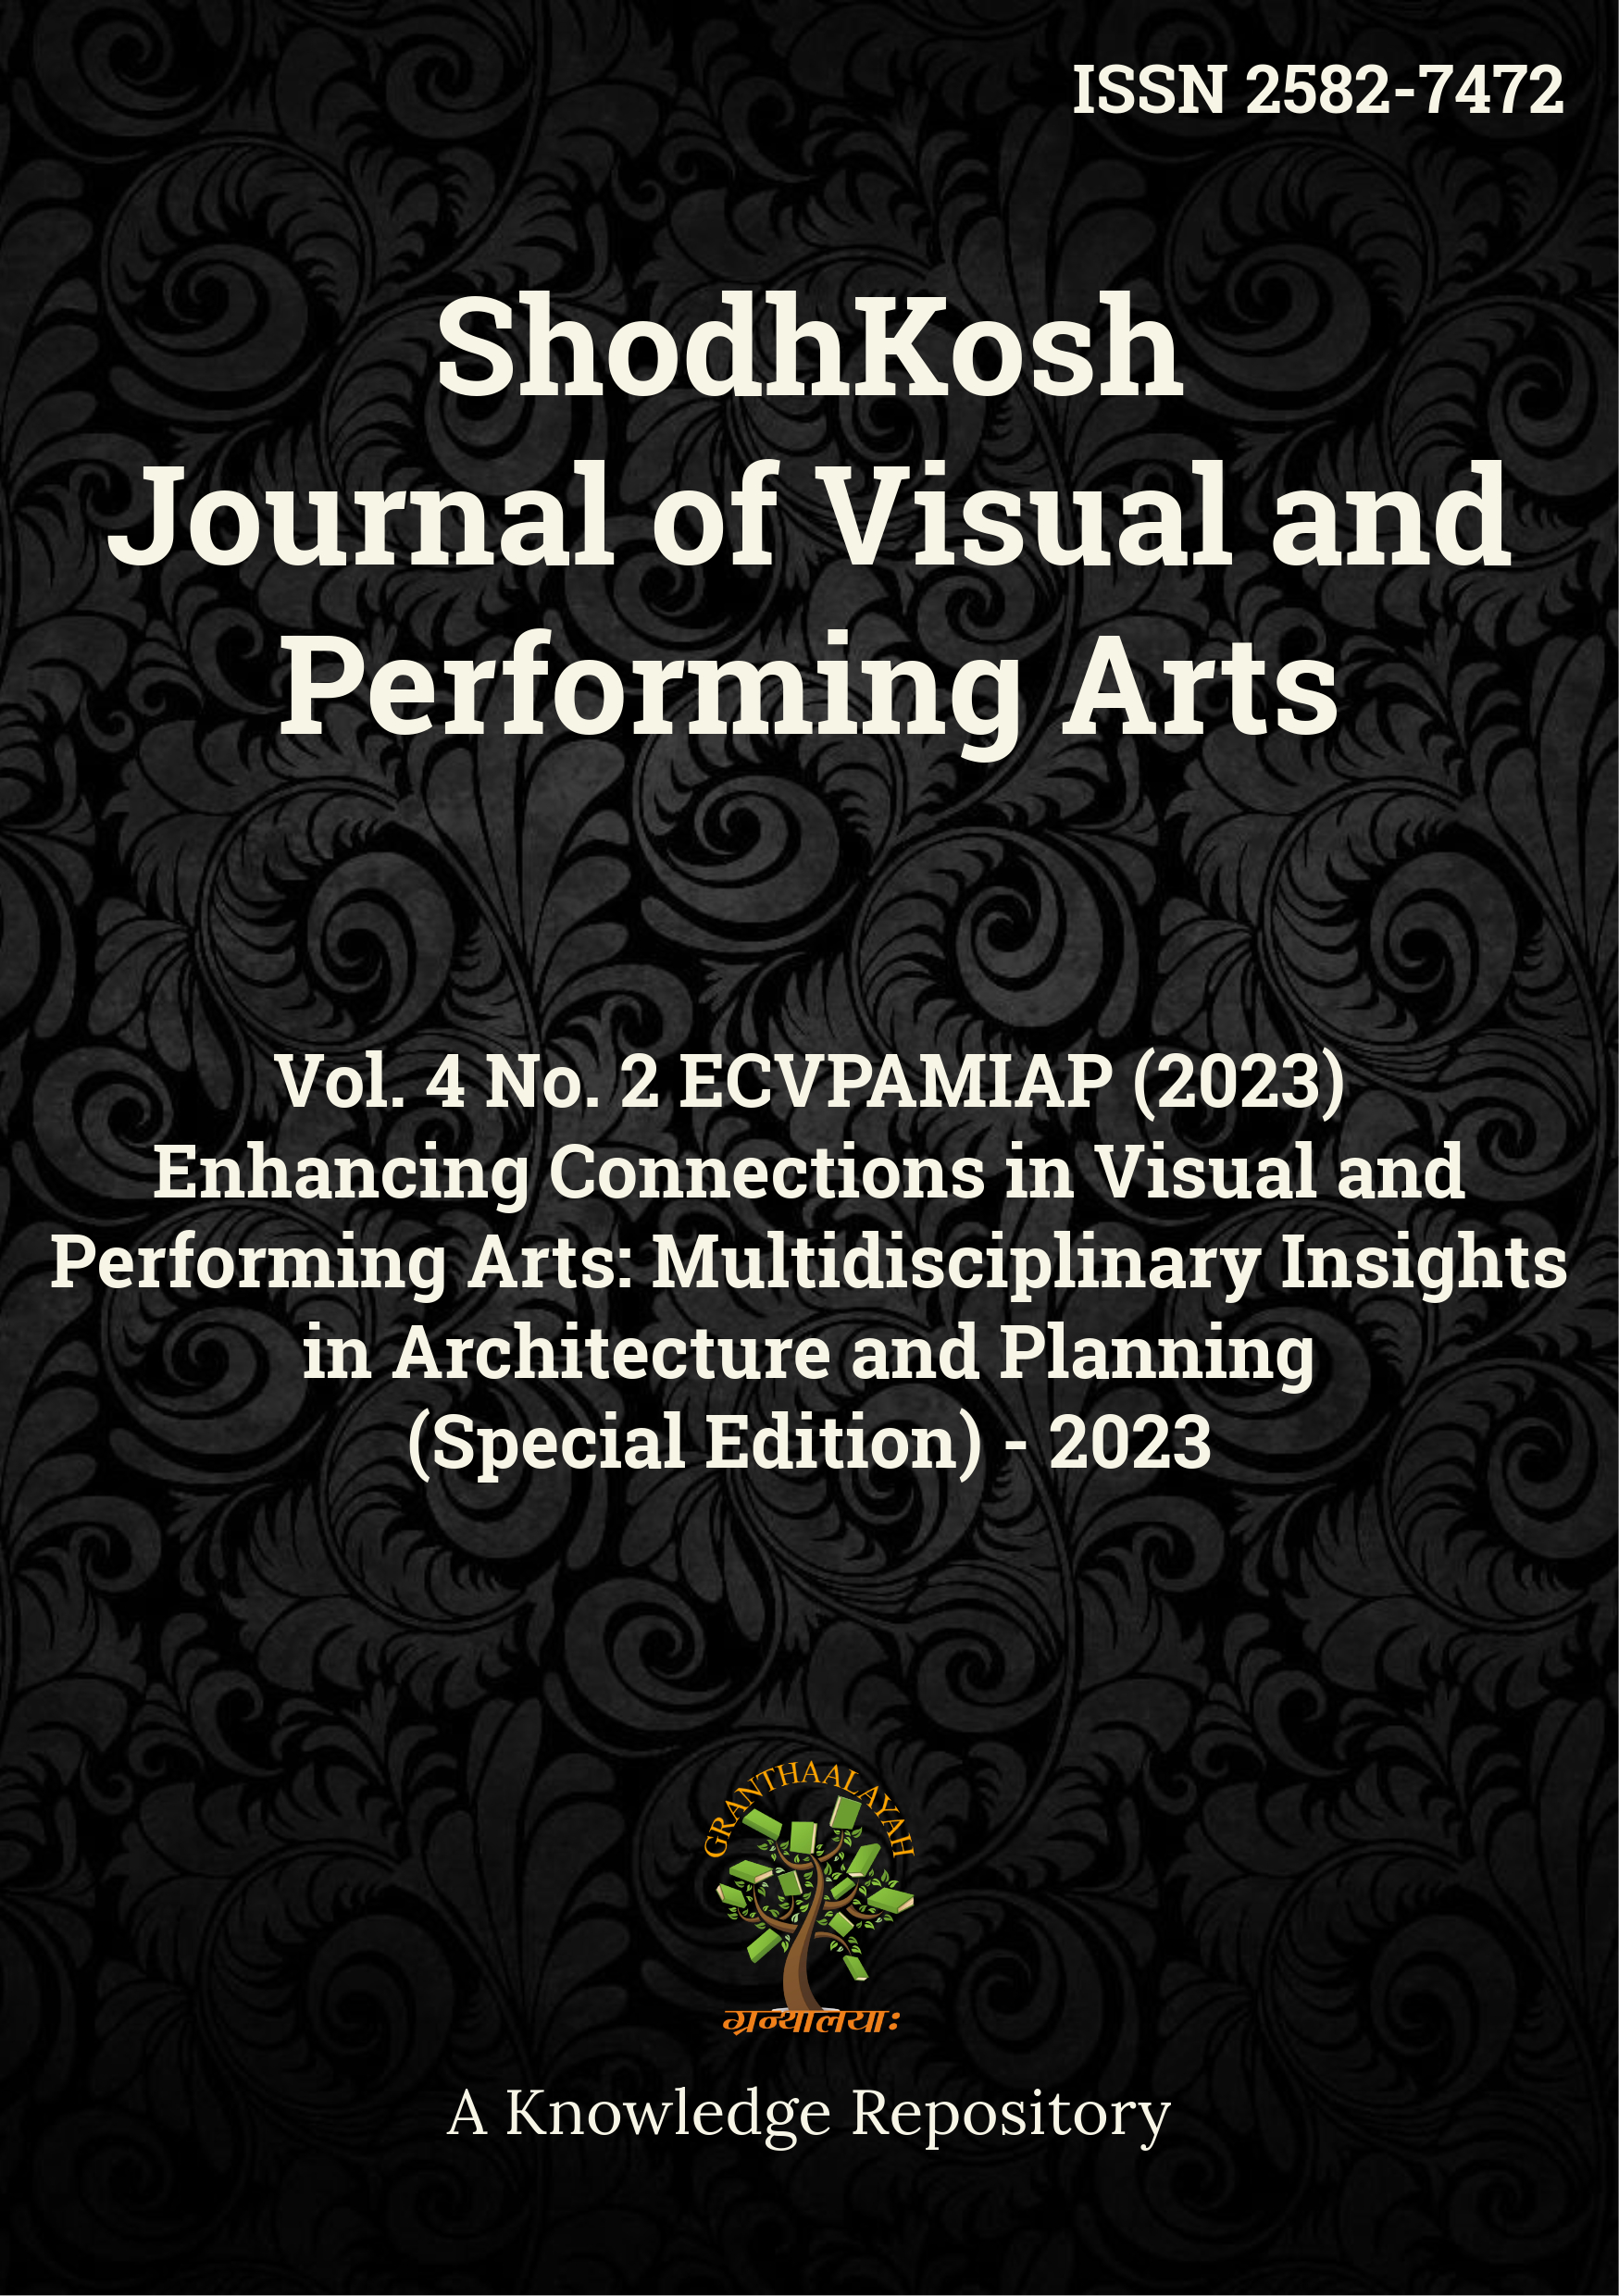 					View Vol. 4 No. 2ECVPAMIAP (2023): Enhancing Connections in Visual and Performing Arts: Multidisciplinary Insights in Architecture and Planning
				